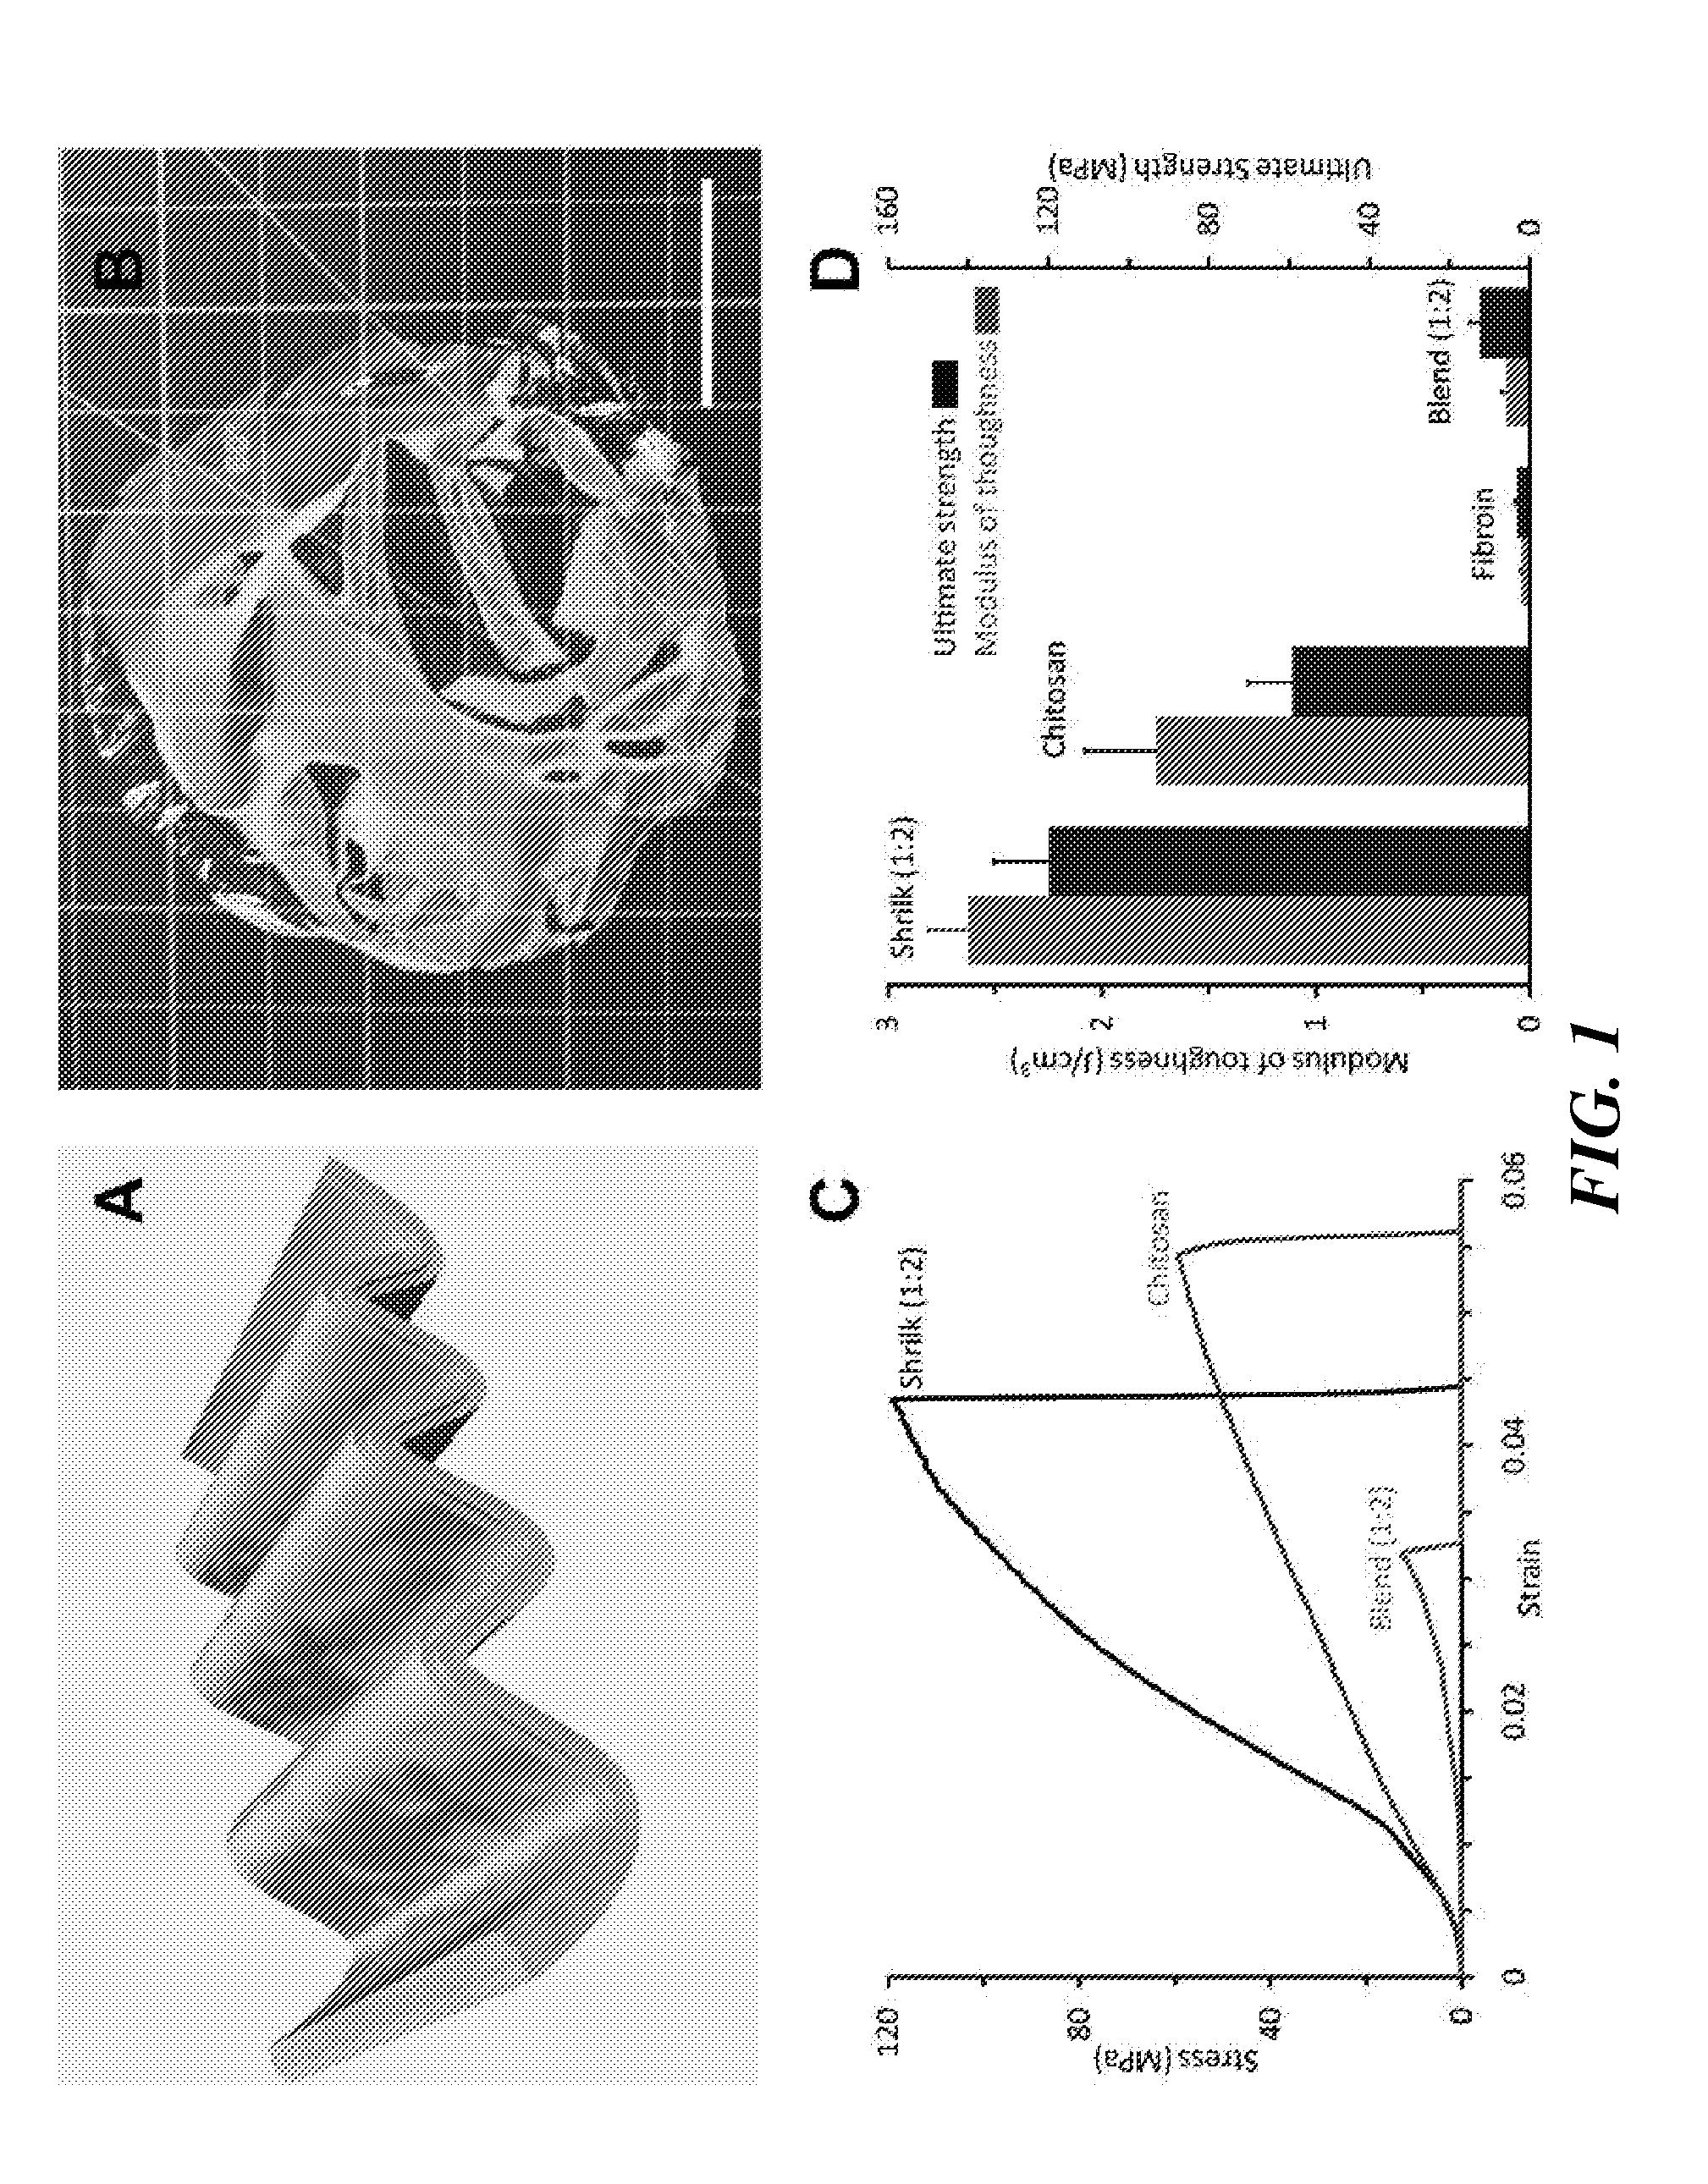 High strength chitin composite material and method of making